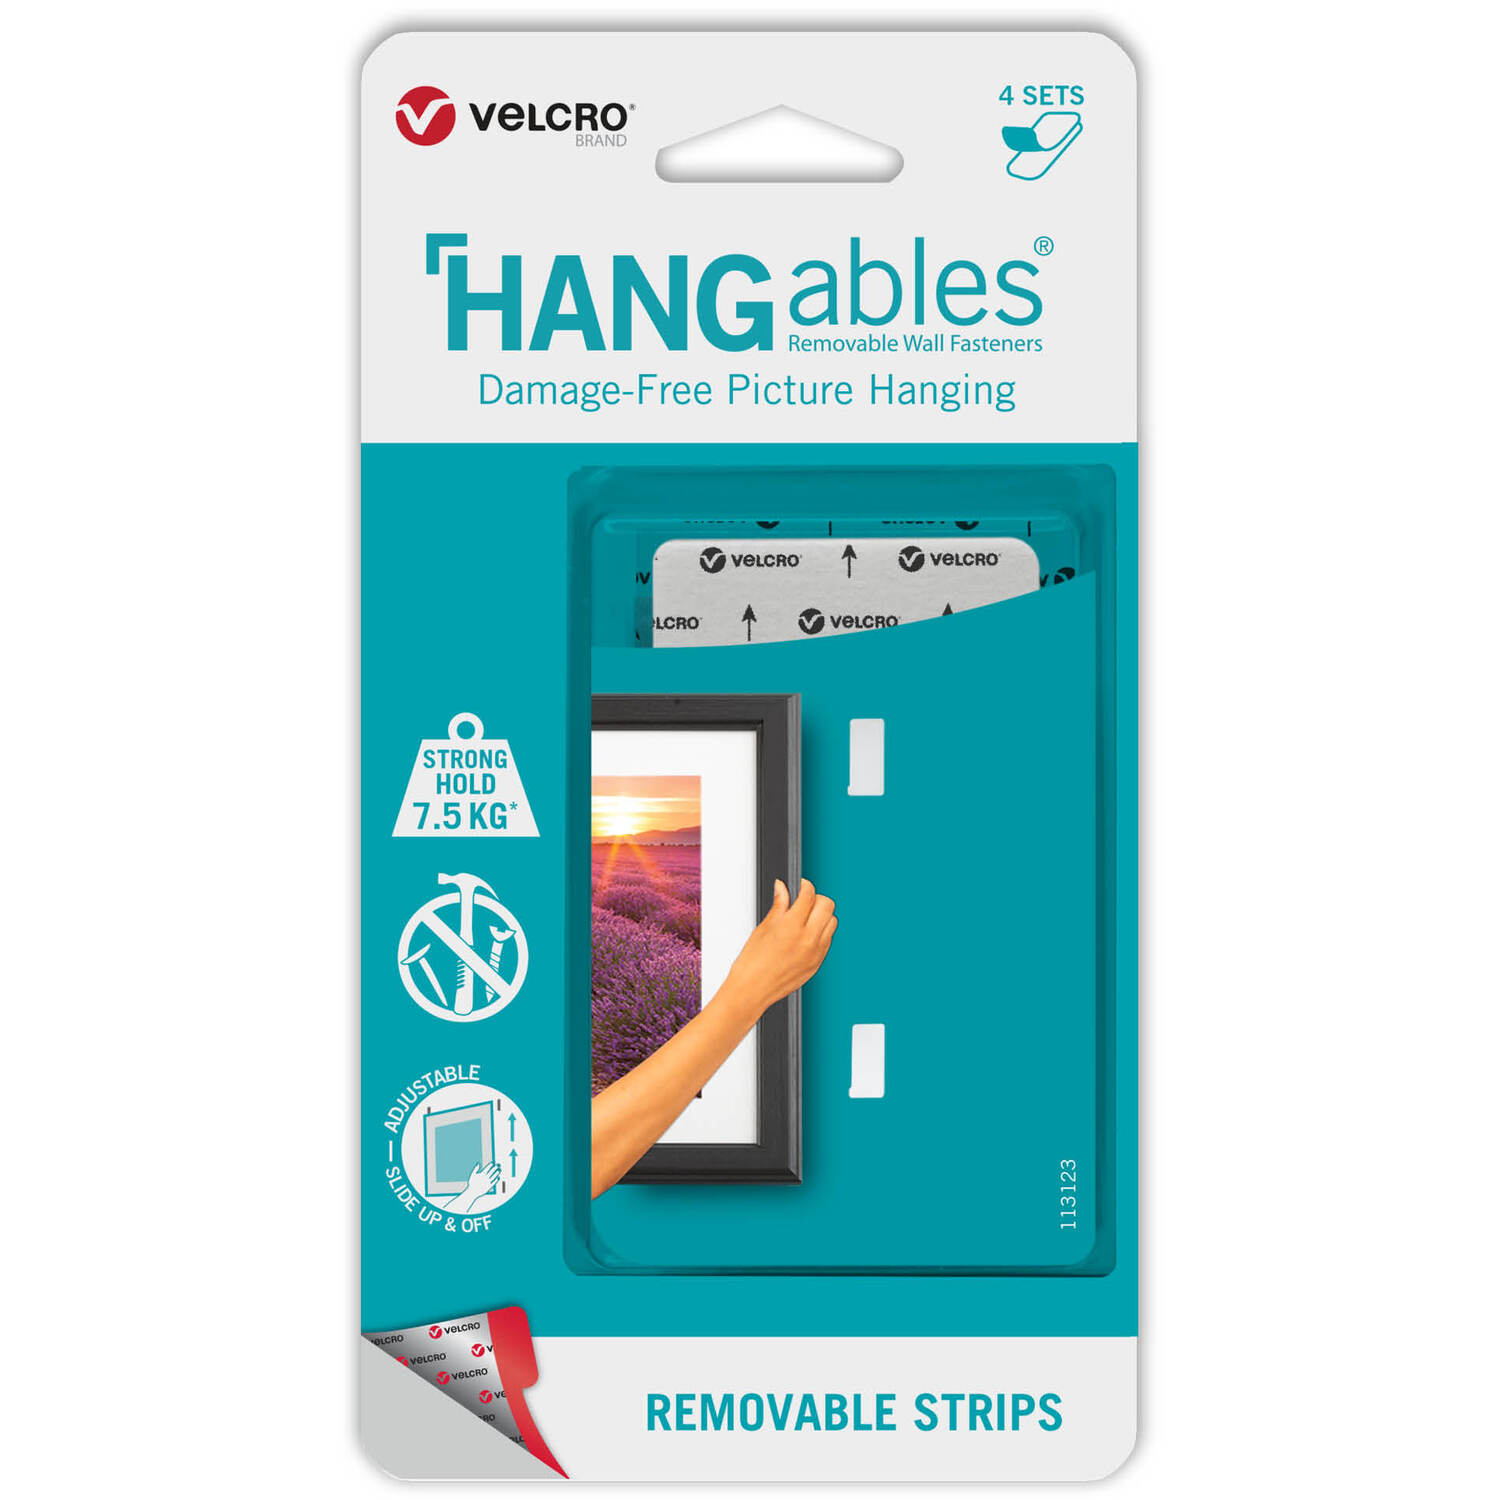 Velcro Hangables Picture Hanging Adhesive Strips Set of 4 Image 2